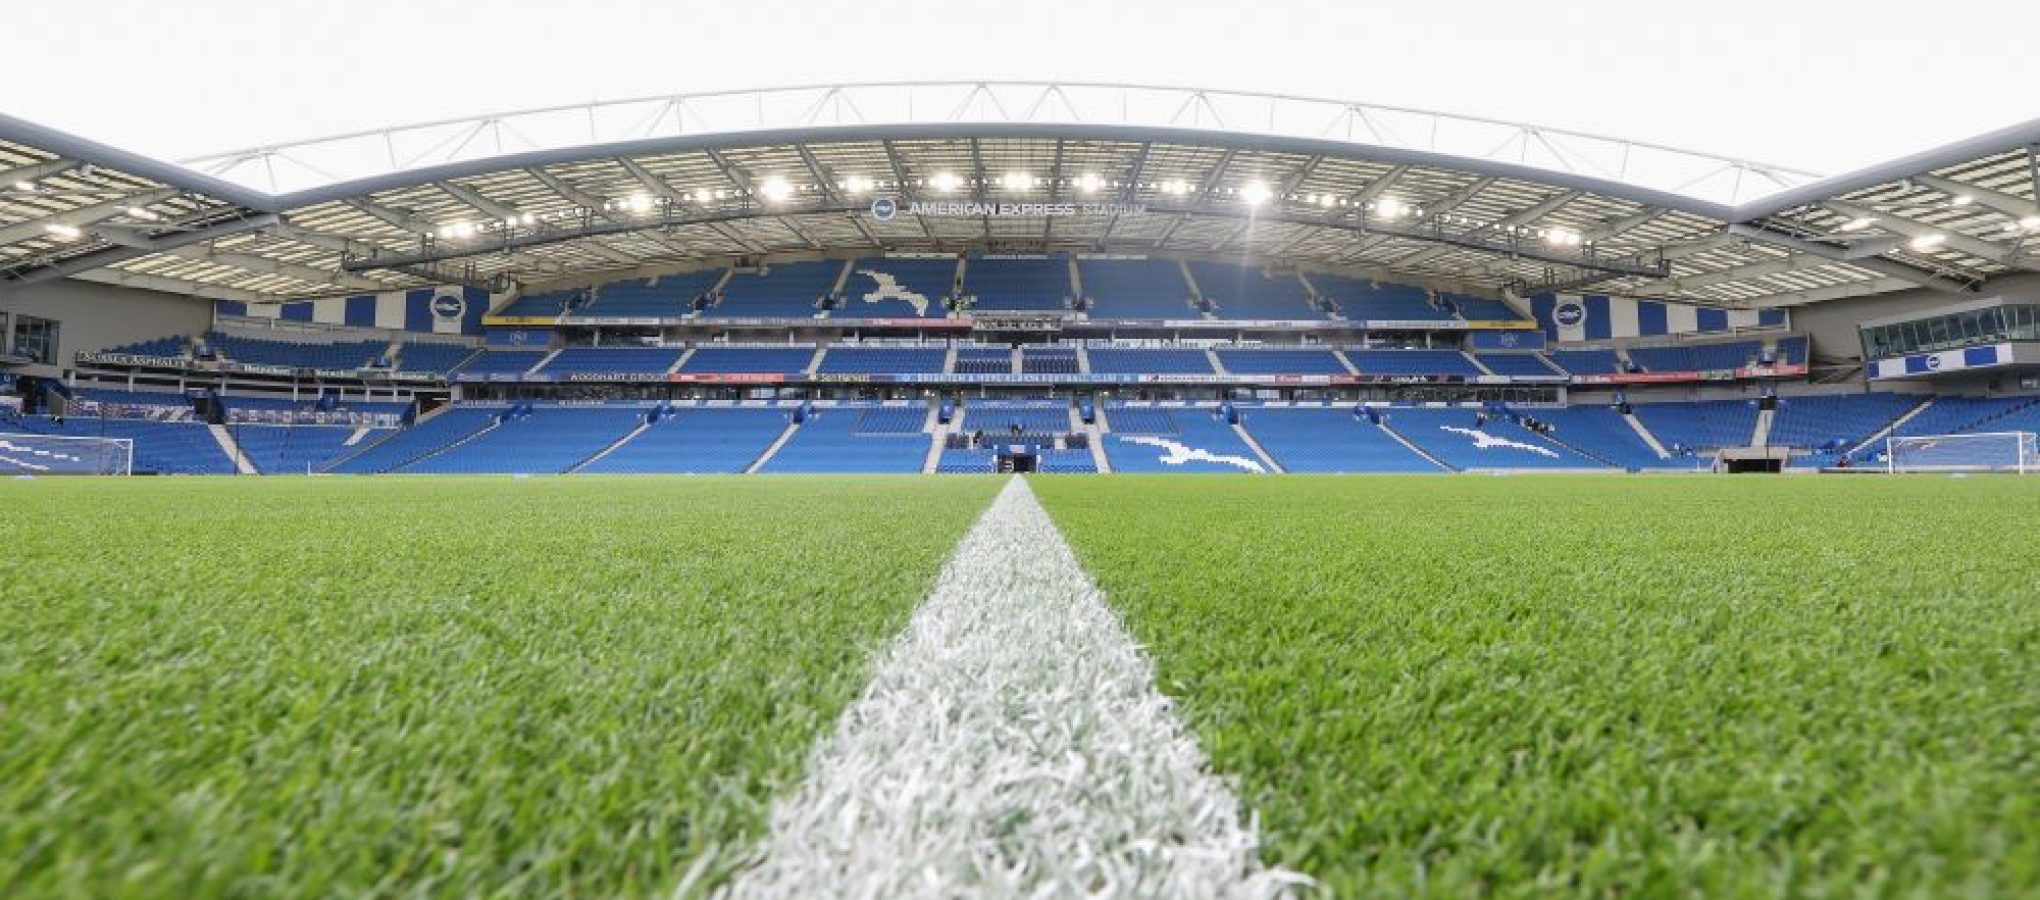 Brighton & Hove Albion - Play on The Pitch